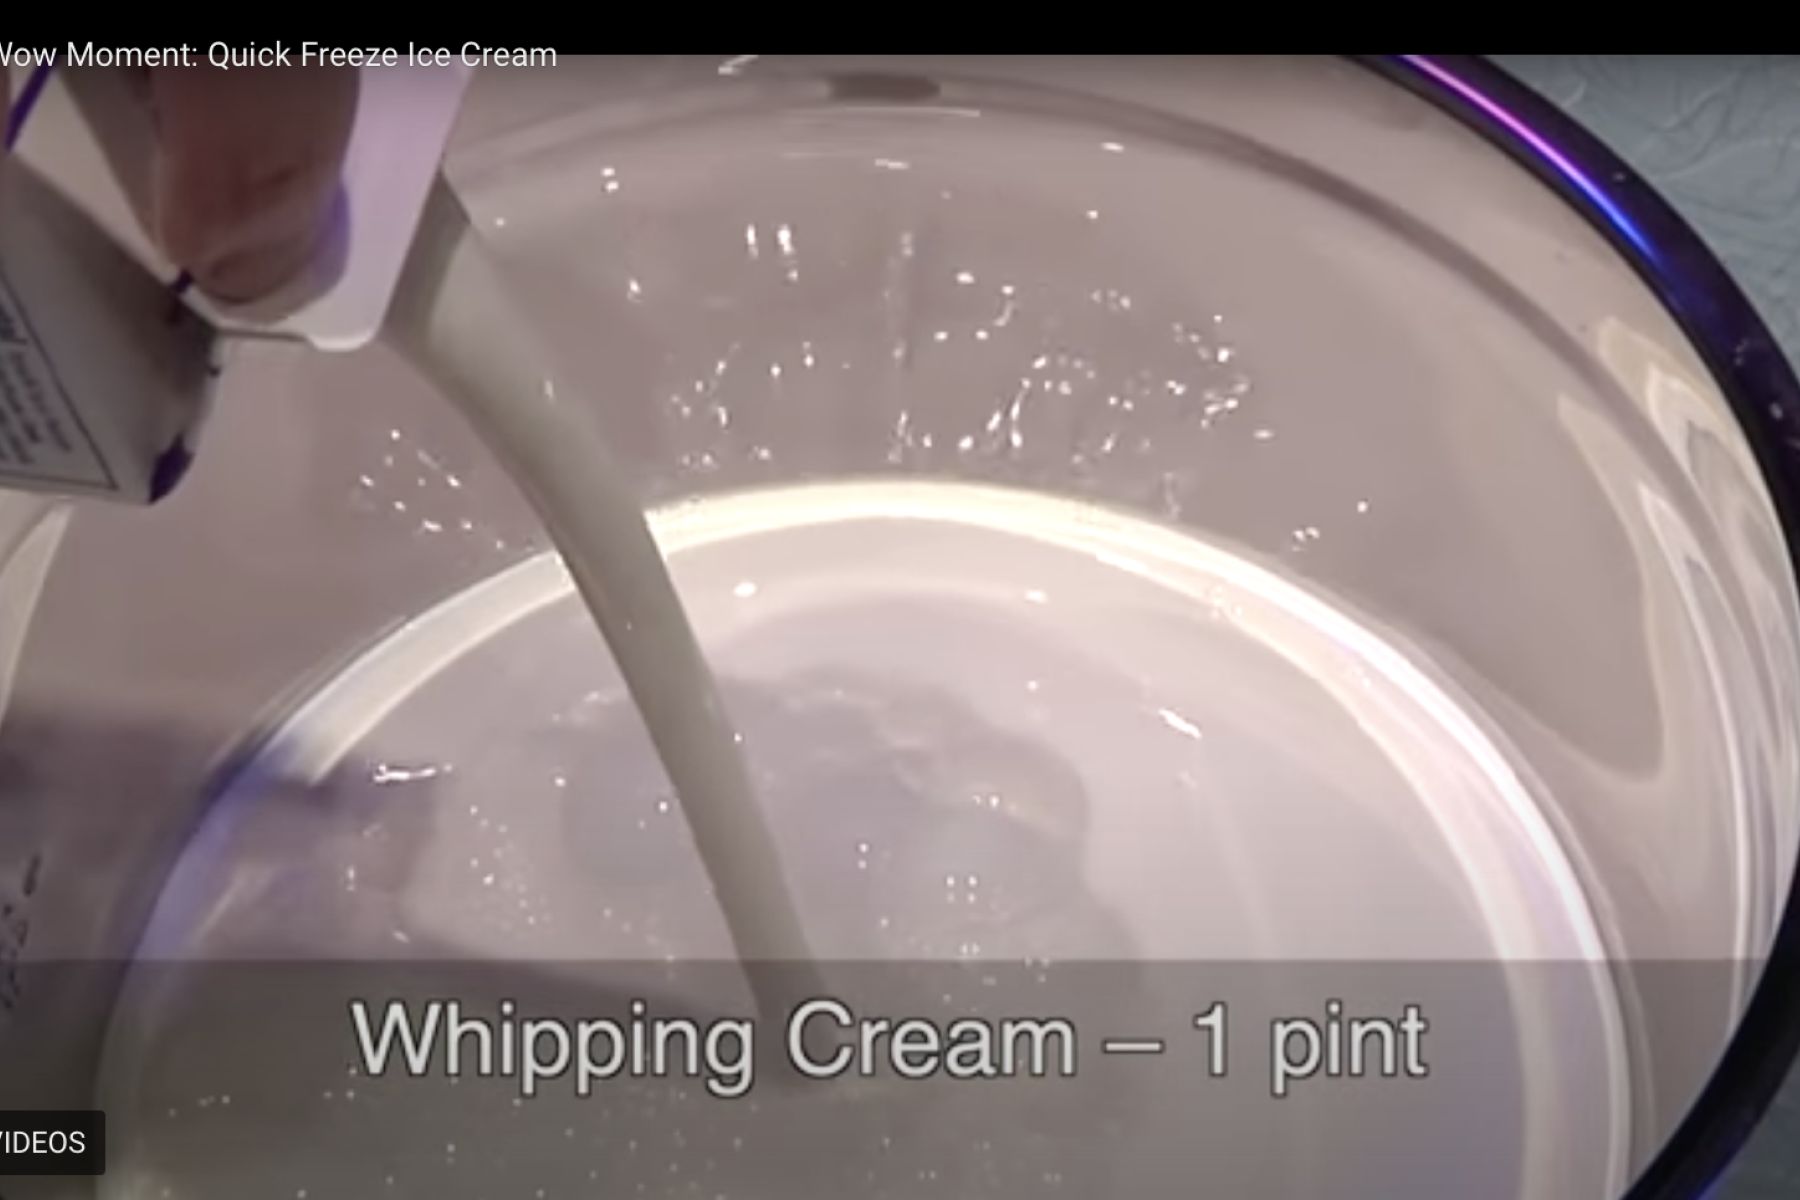 Nano ice cream activity Mr. O video screenshot showing presenter 's hand pouring whipping cream into bowl